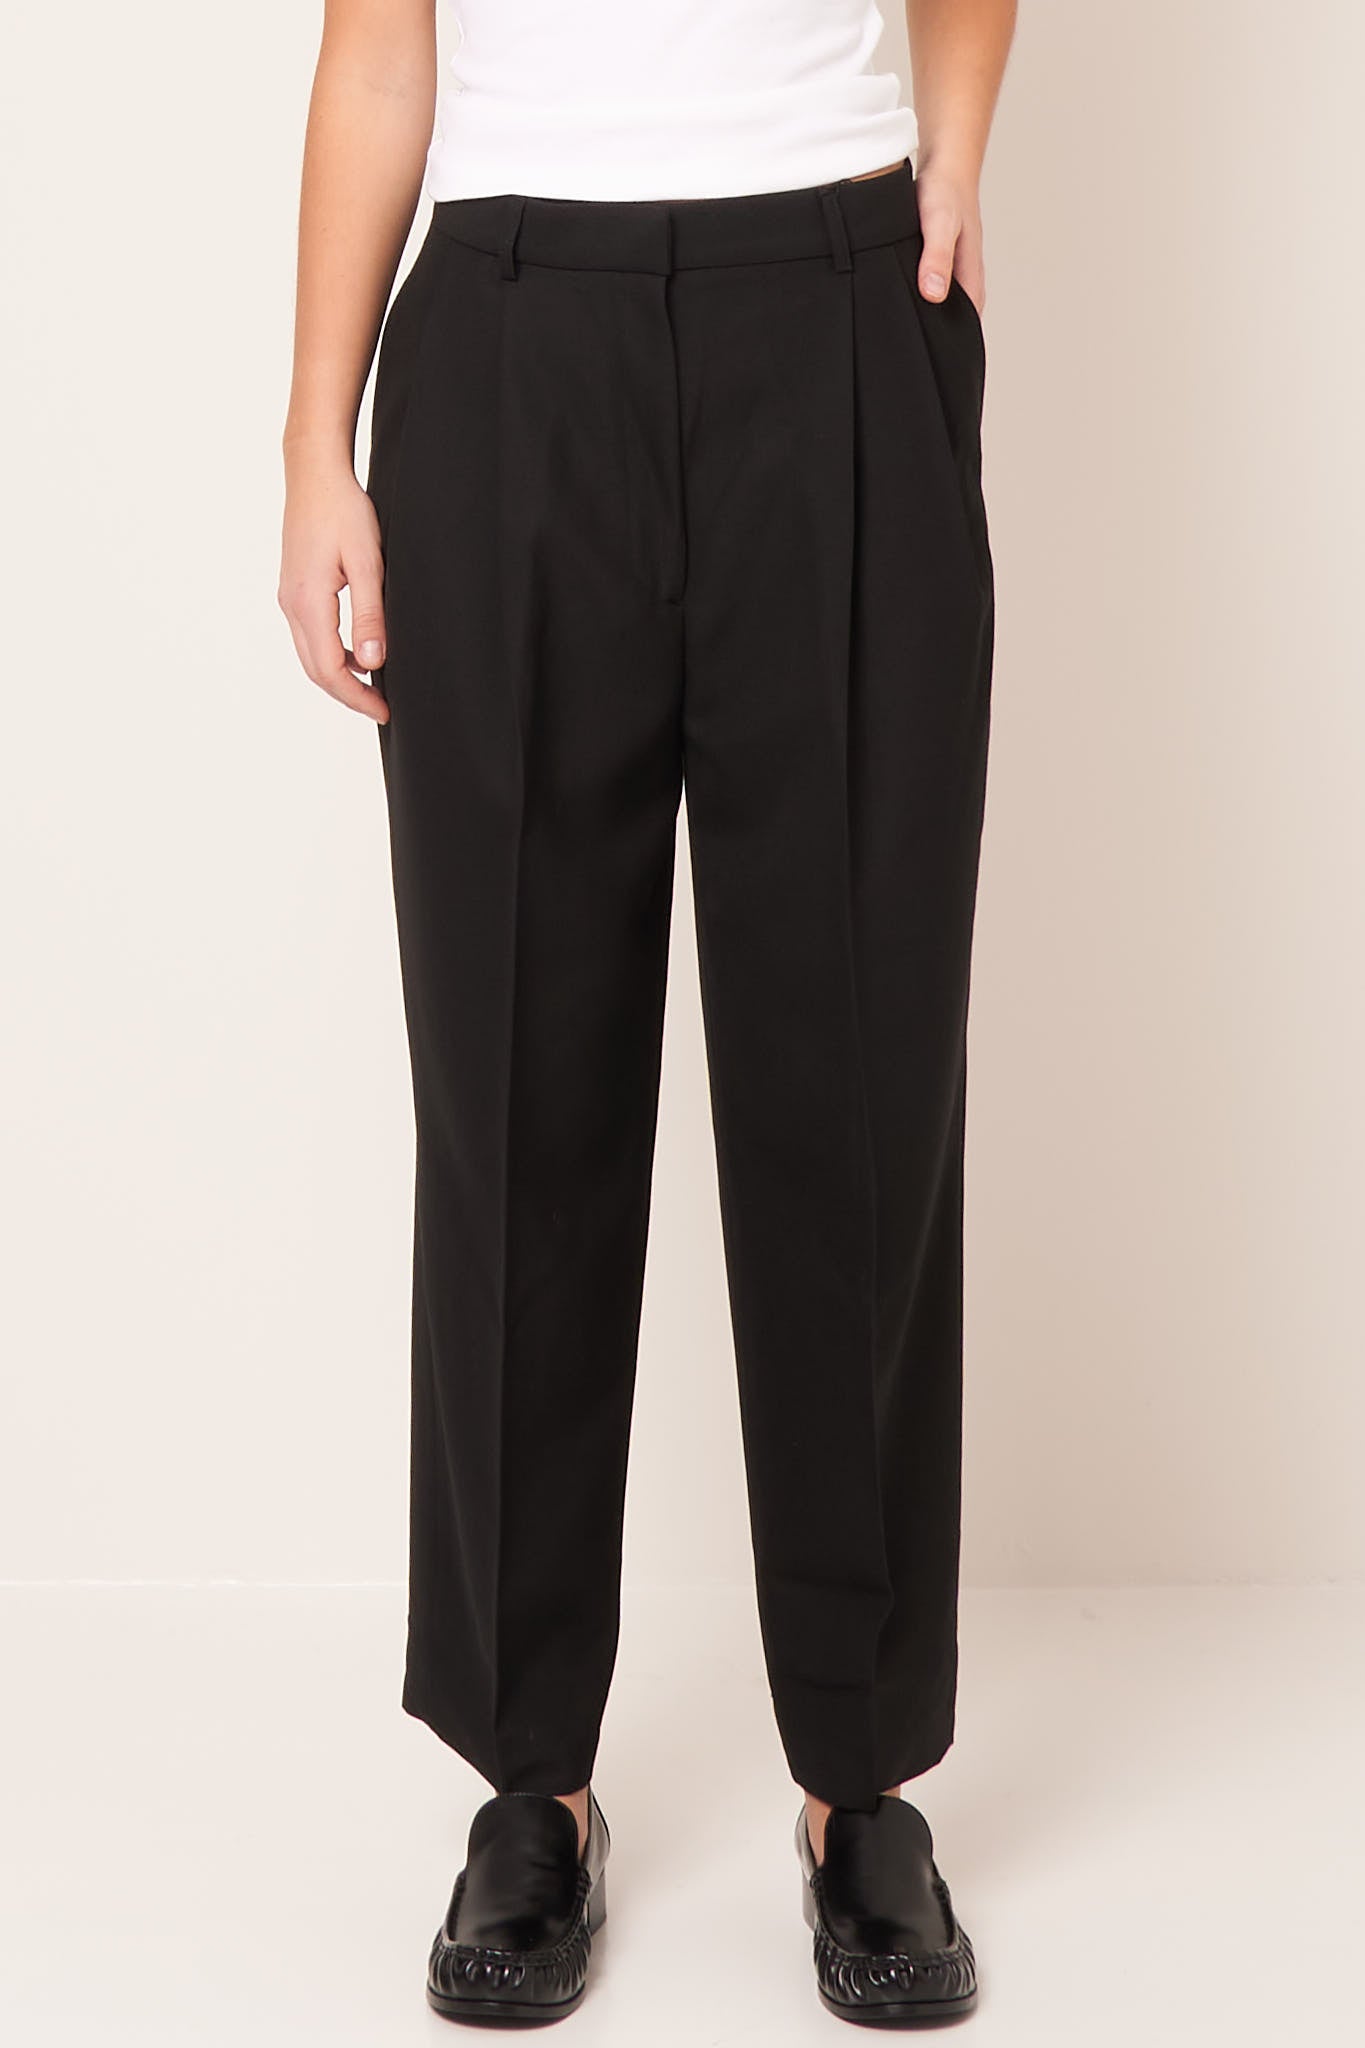 Gray Double-Pleated Trousers by TOTEME on Sale